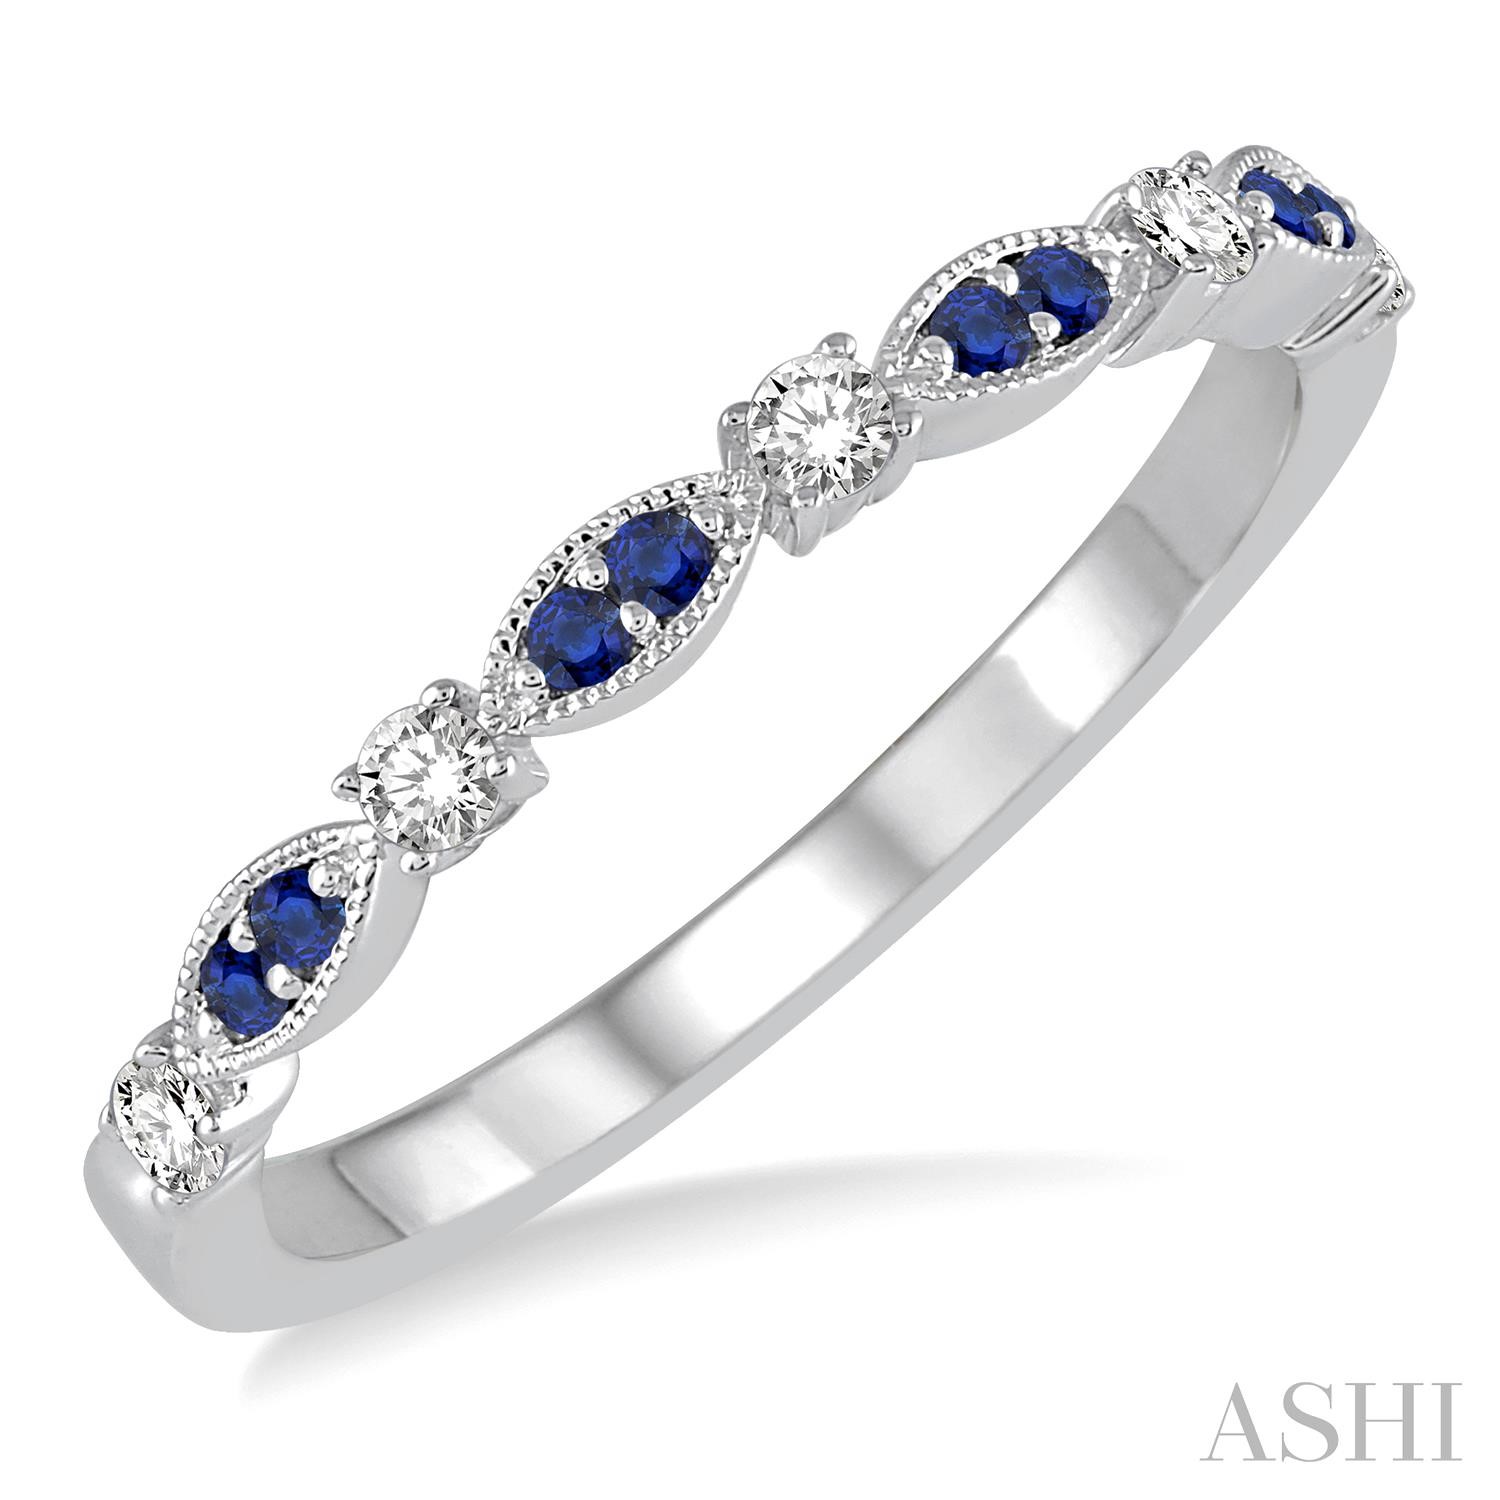 MILGRAIN 14K WHITE GOLD STACKABLE RING SIZE 6.5 WITH 8=1.35MM ROUND BLUE SAPPHIRES AND 5=0.15TW ROUND G-H SI2-SI3 DIAMONDS